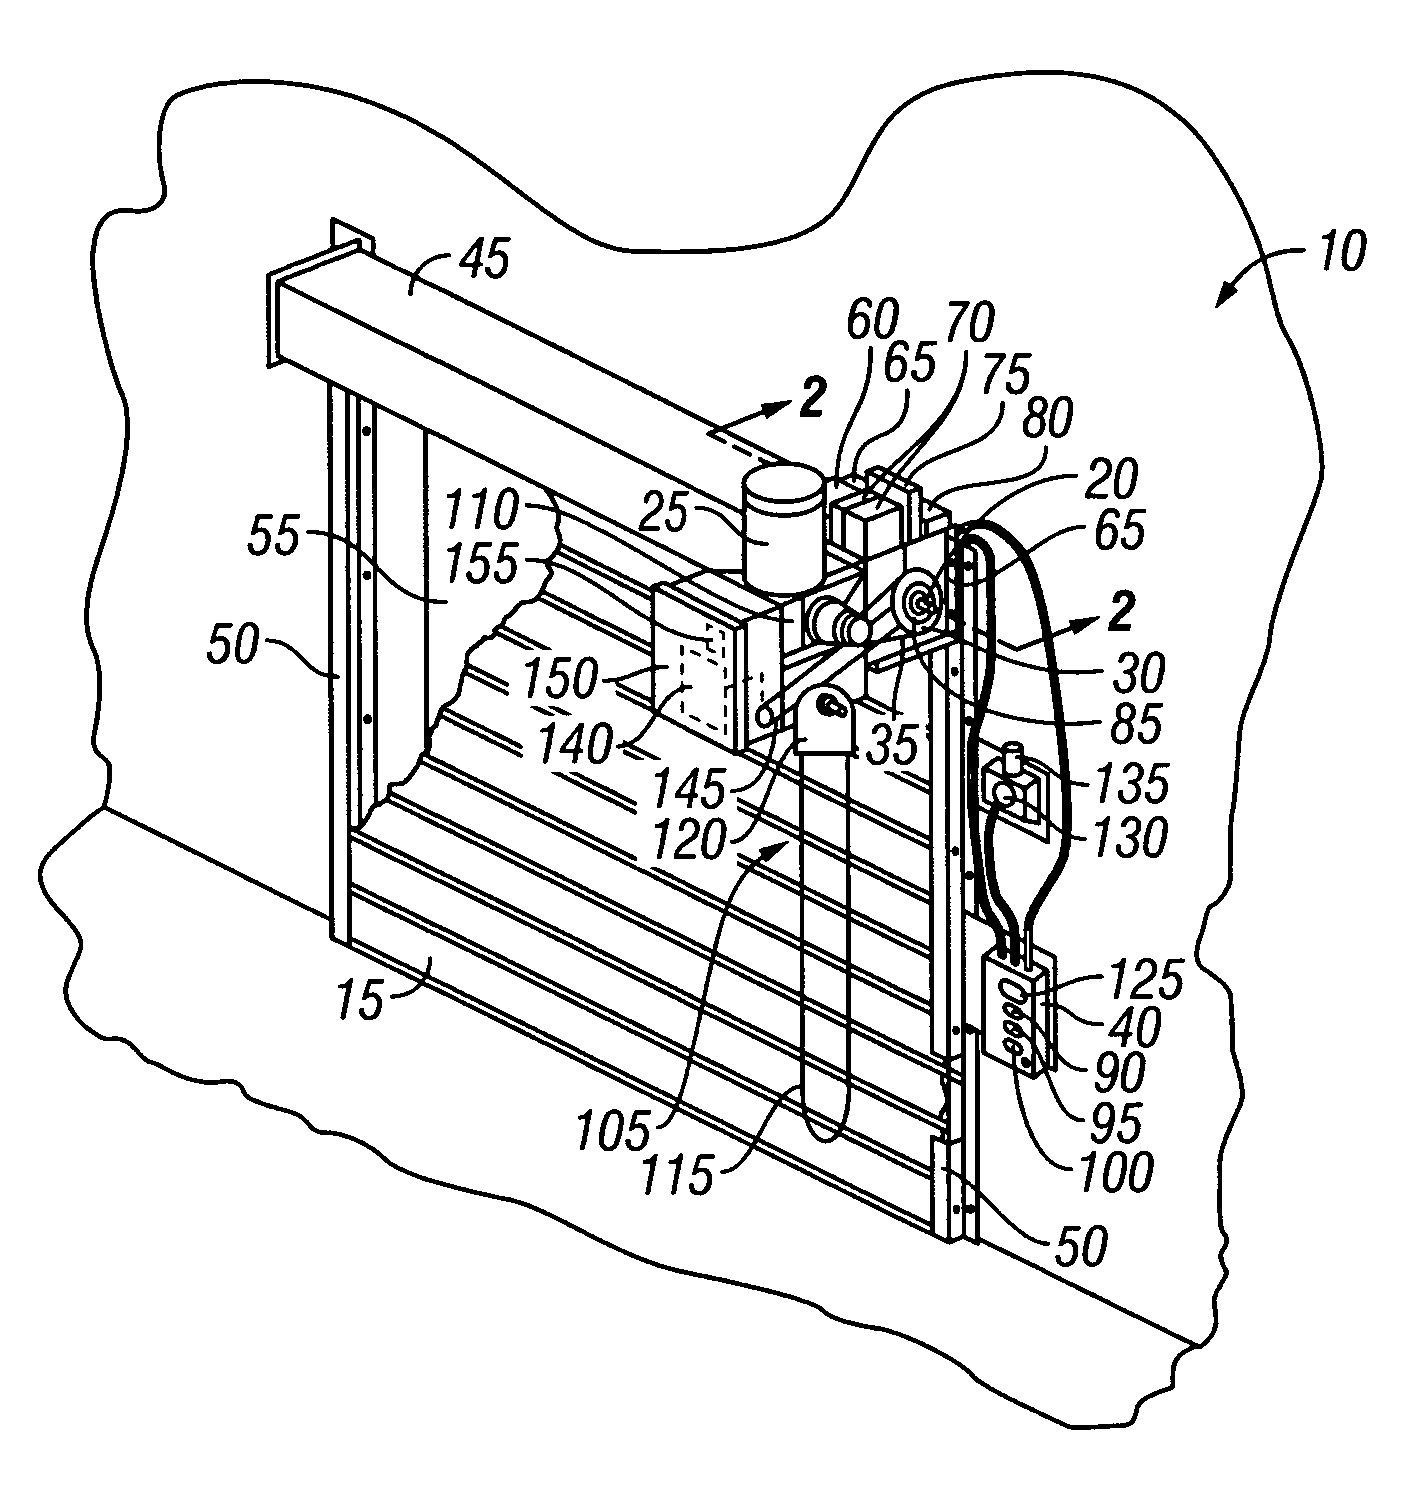 Fire door control system and method including periodic system testing